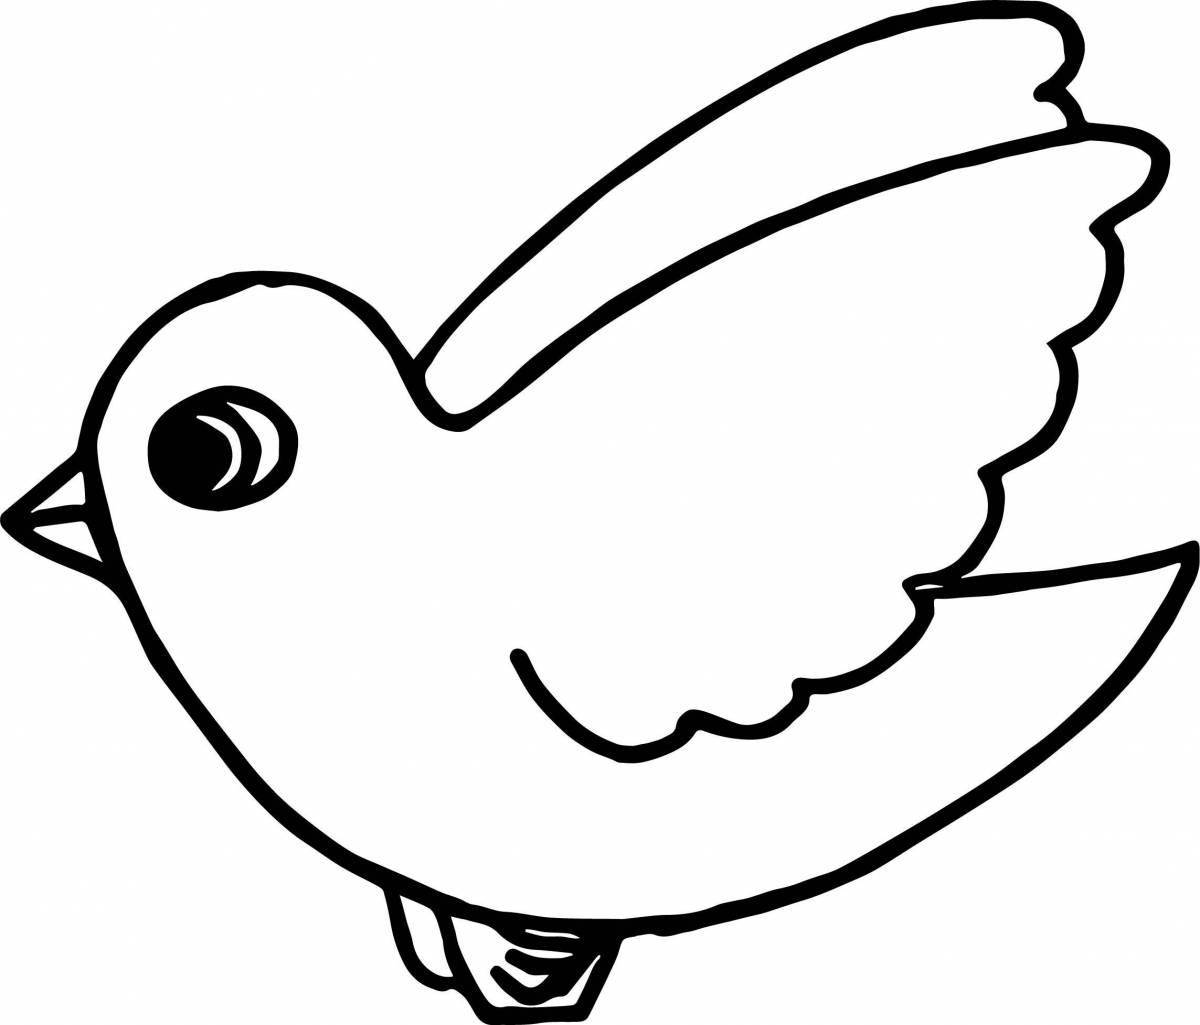 Coloring pages with funny birds for 3-4 year olds